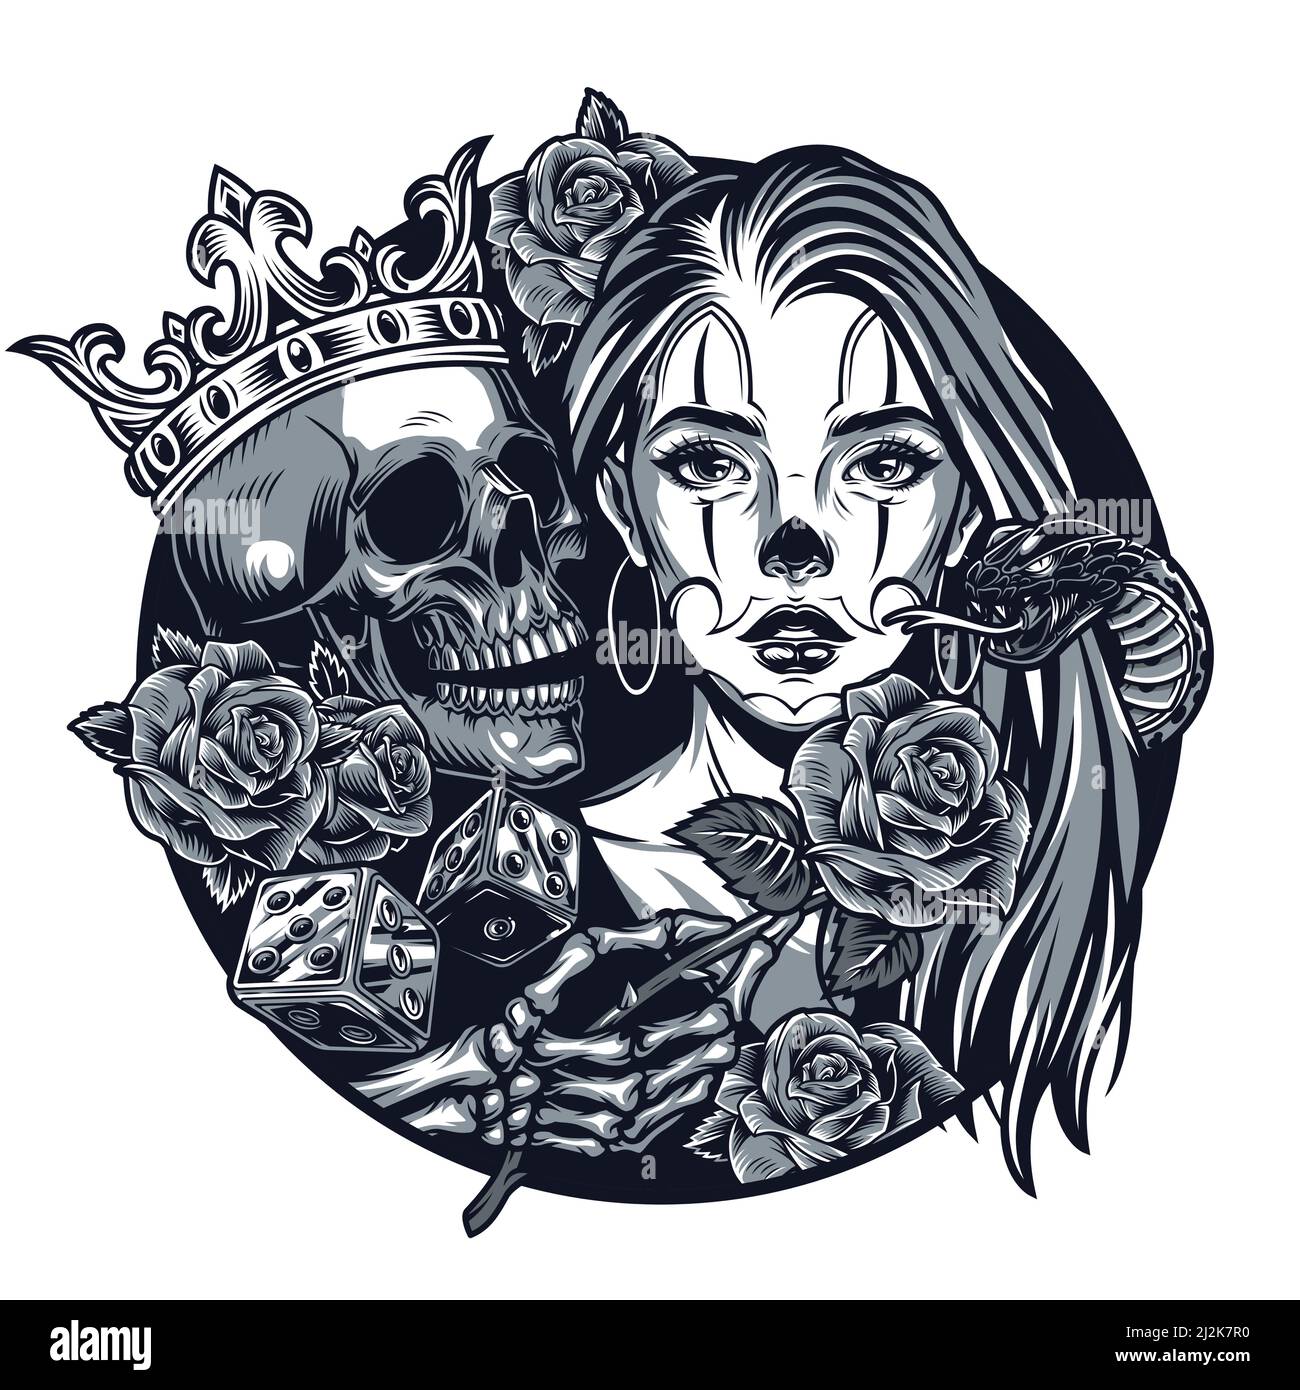 Tattoo Flash of Chicanos Roses Flowers